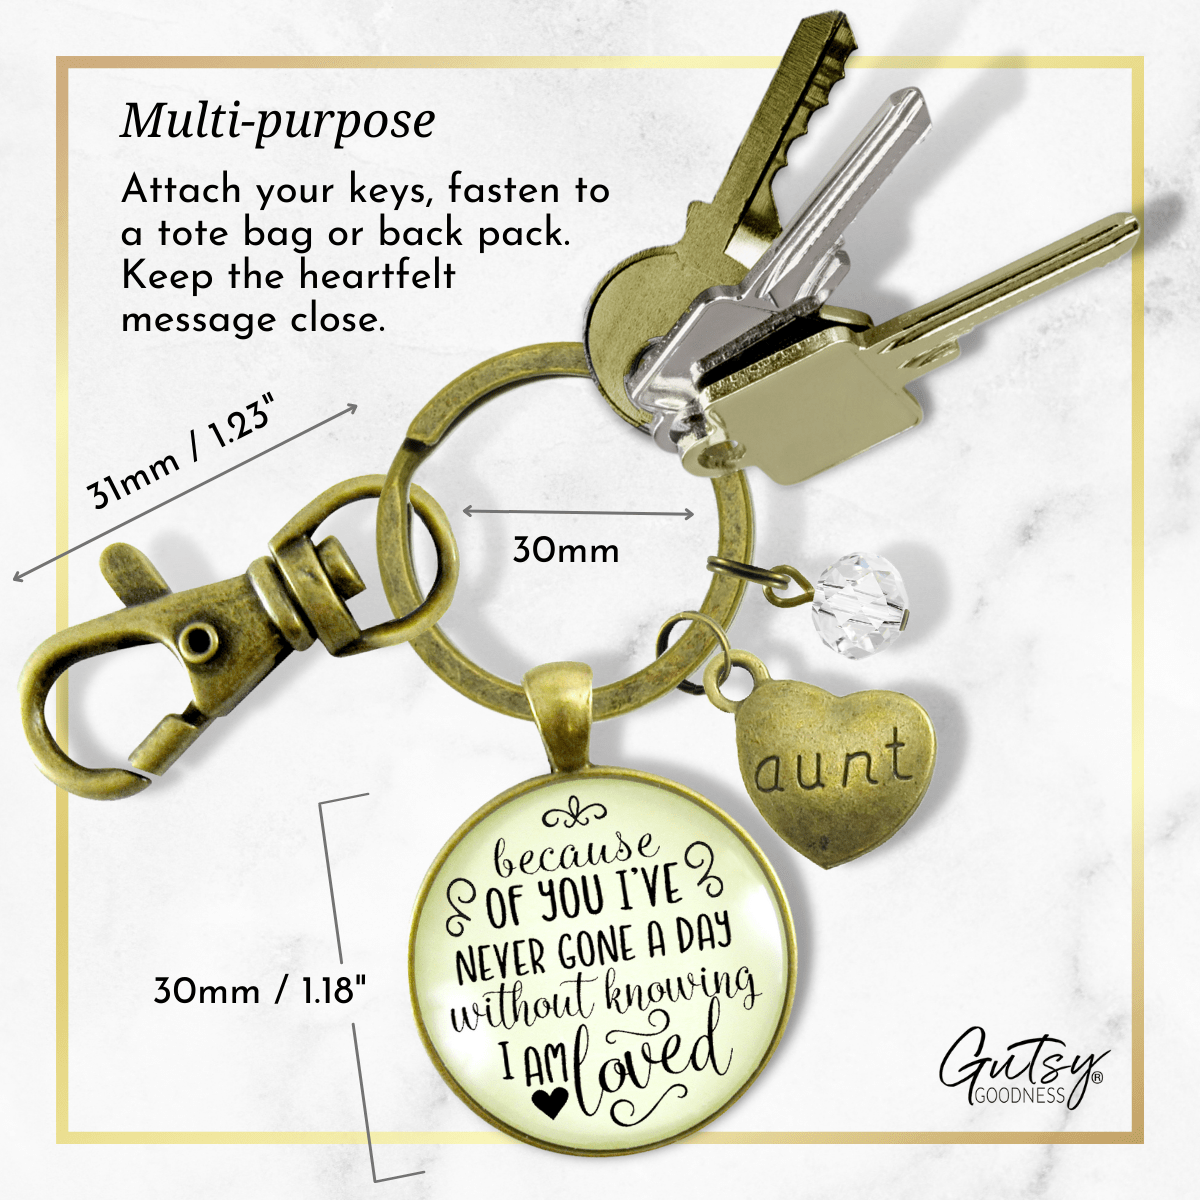 Aunt Keychain Because Of Your Love Sentimental Gift Family Jewelry - Gutsy Goodness Handmade Jewelry;Aunt Keychain Because Of Your Love Sentimental Gift Family Jewelry - Gutsy Goodness Handmade Jewelry Gifts